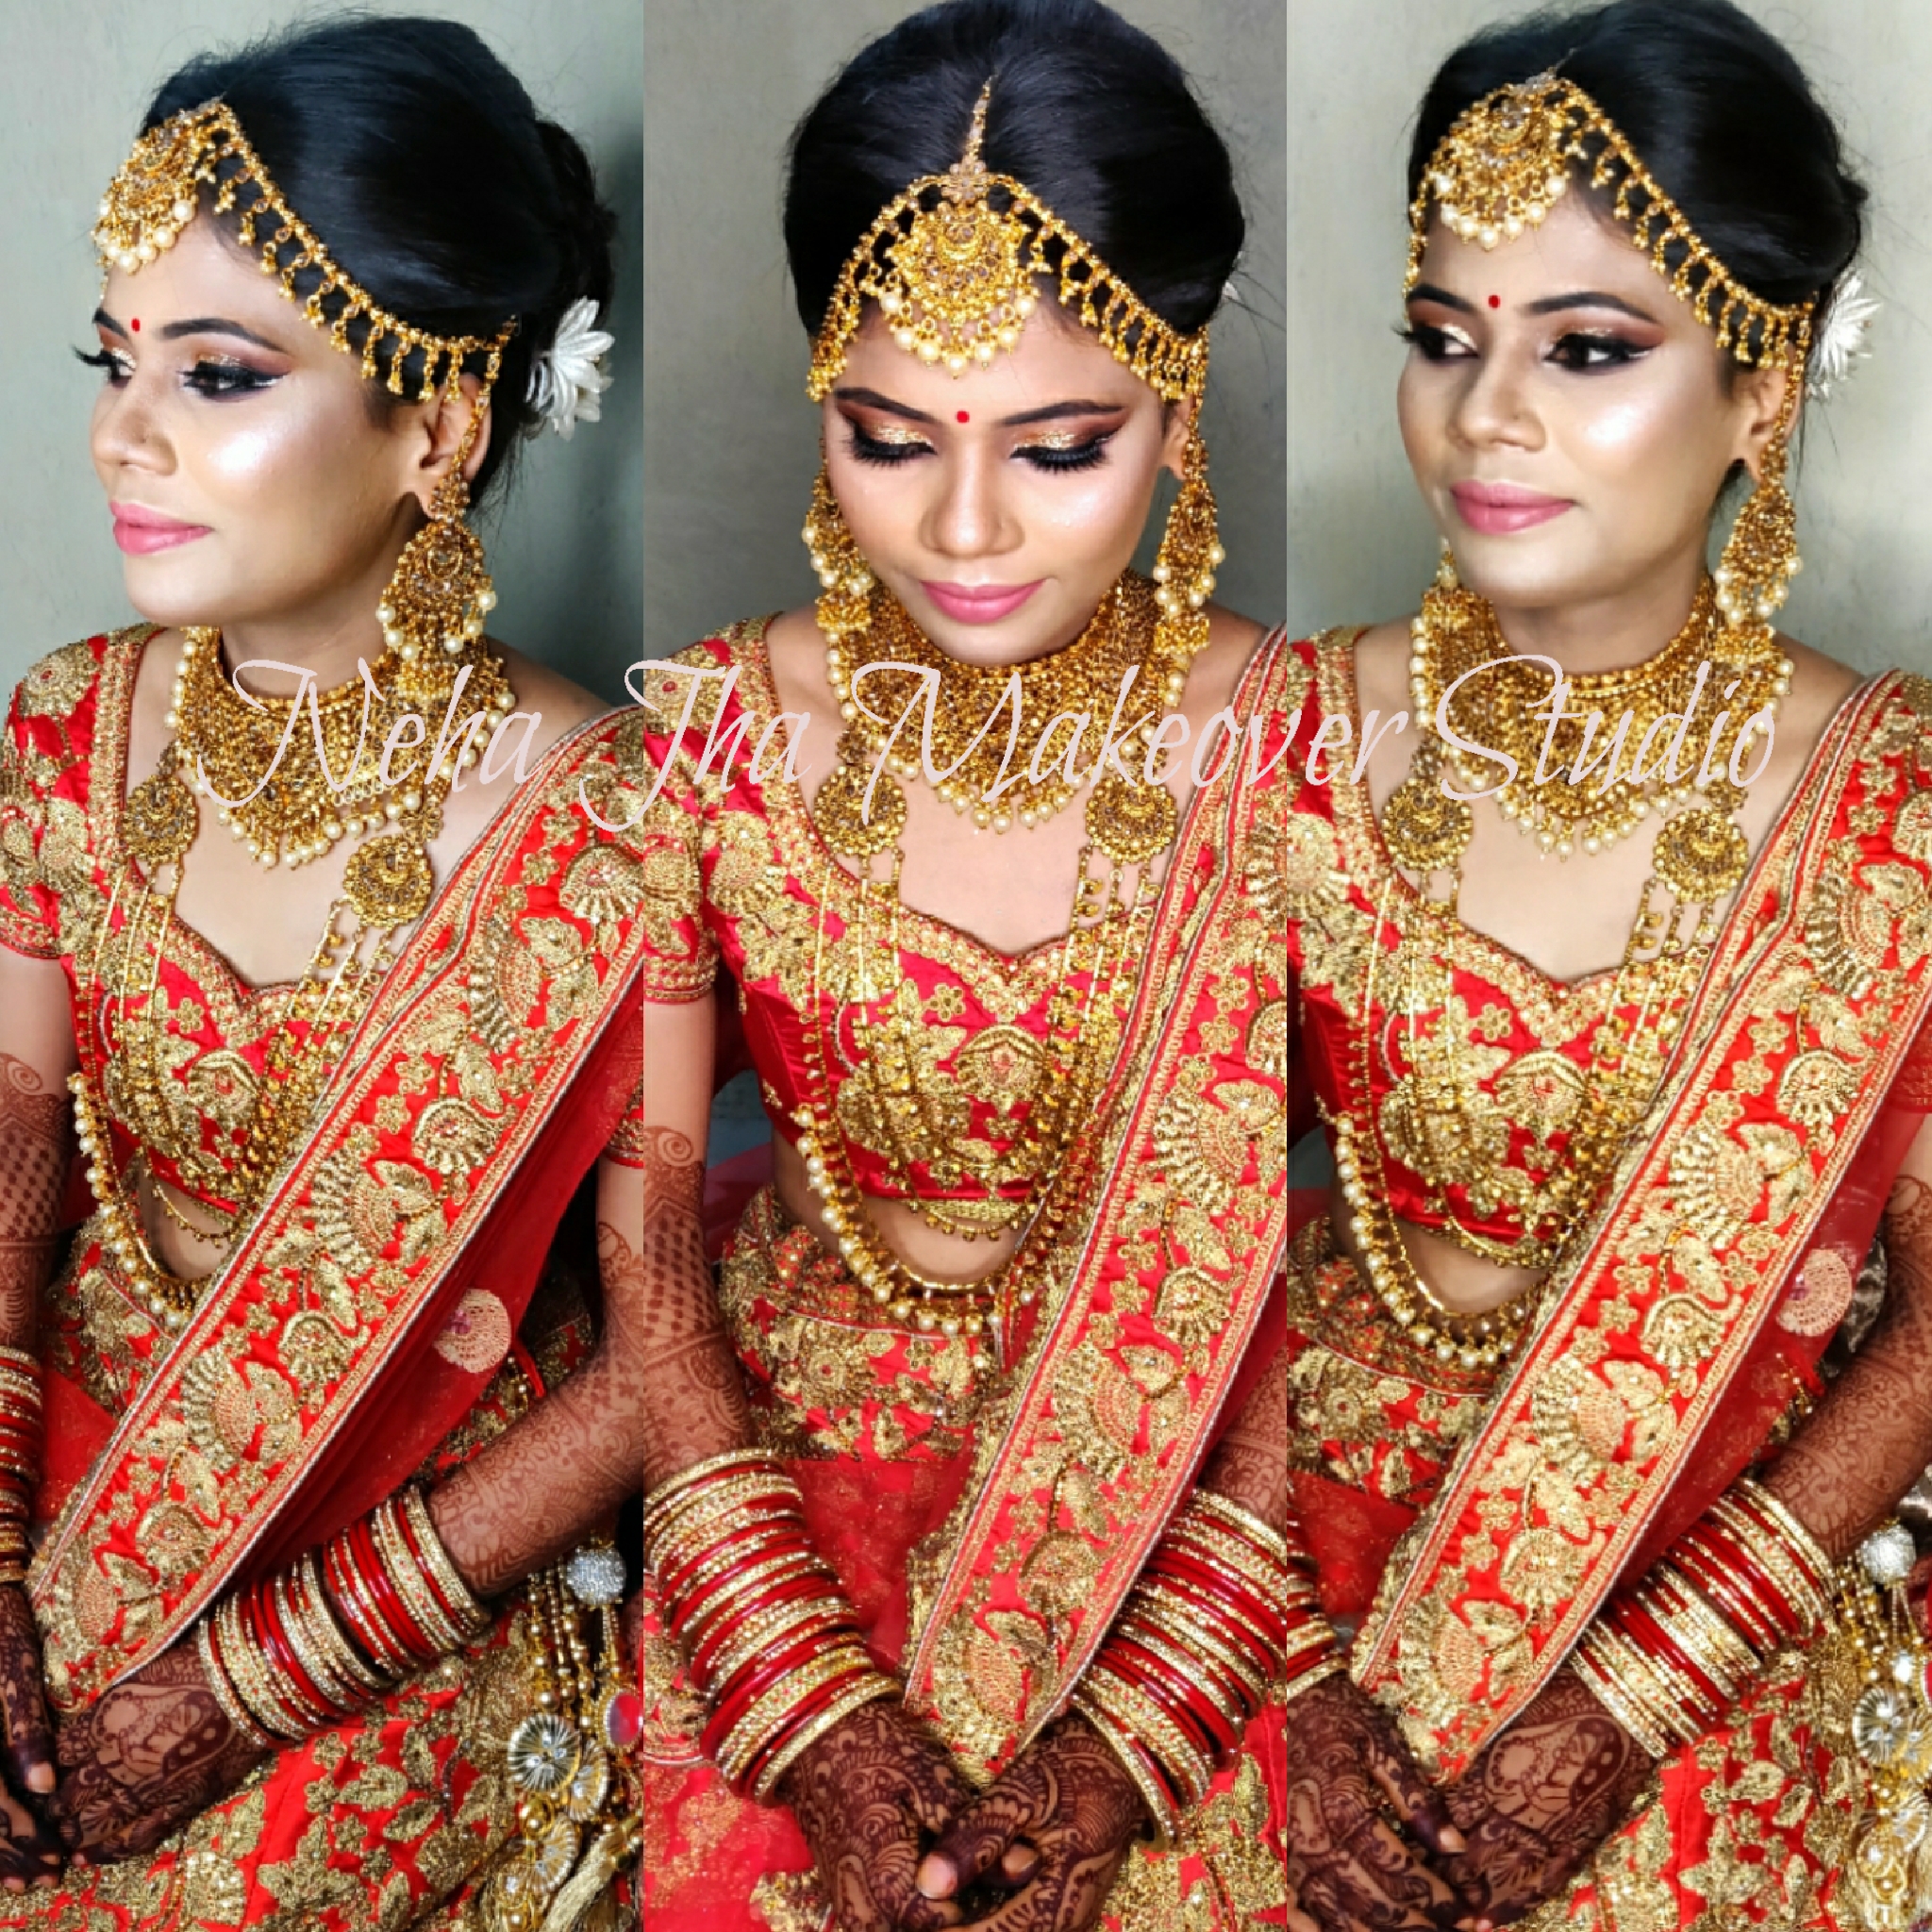 Neha Jha Makeup Artist Services, Review and Info - Olready